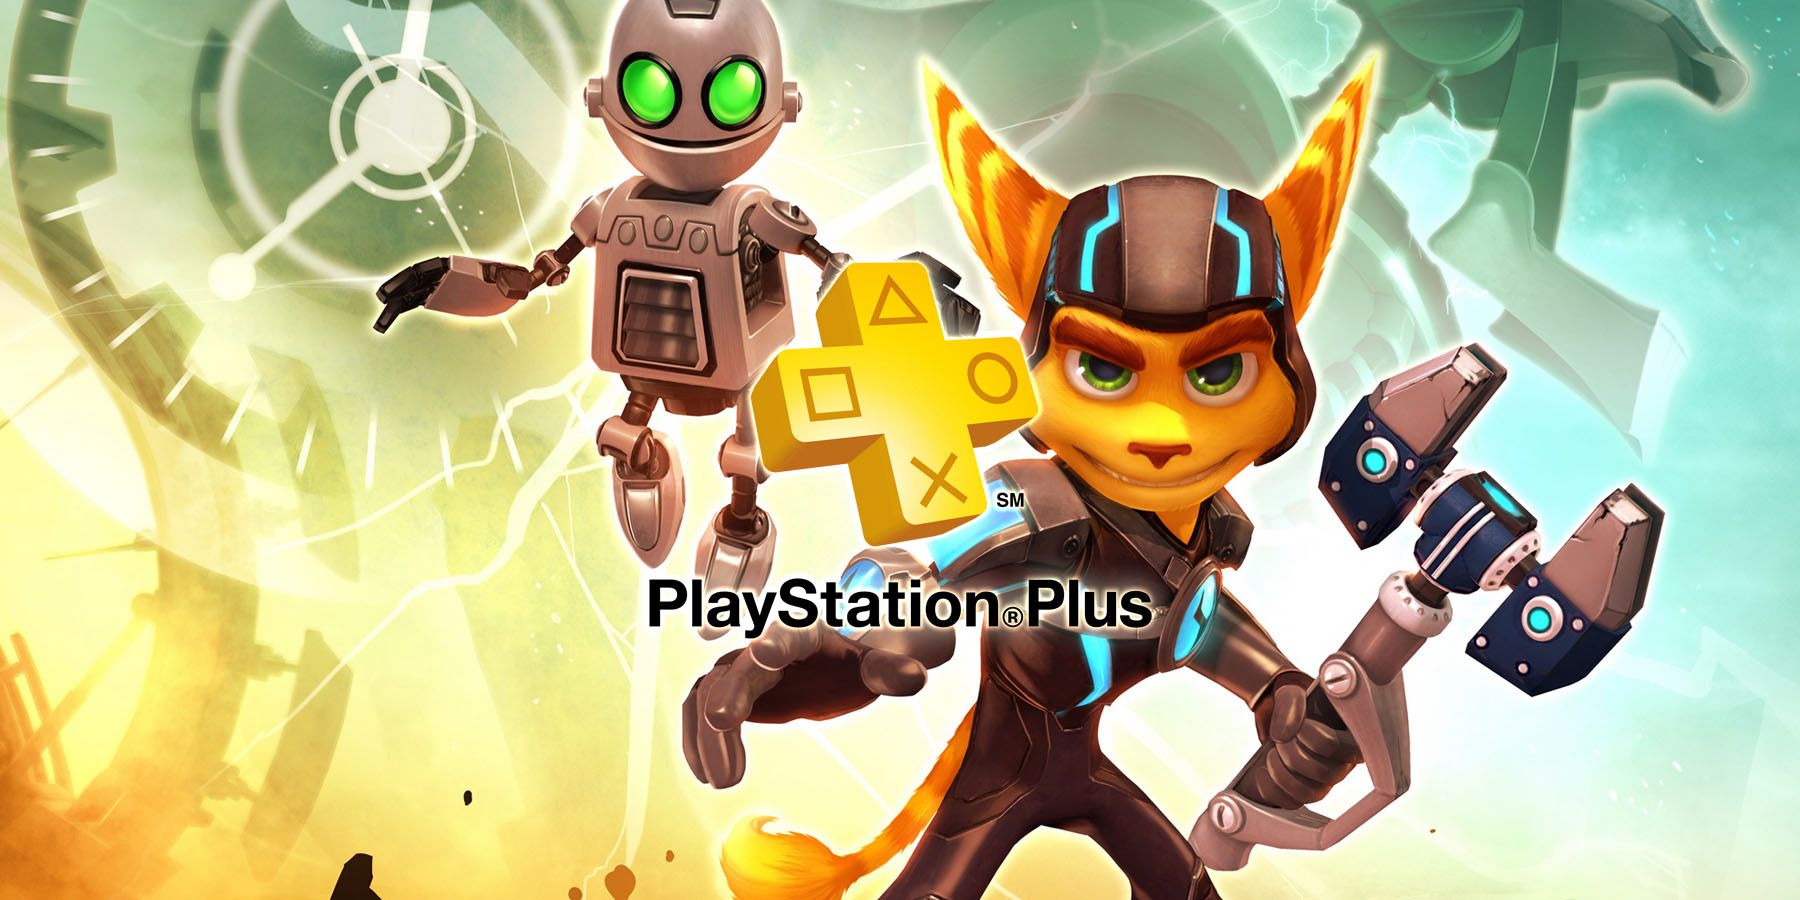 Free games for PS Plus Extra and Premium in May: Ratchet & Clank